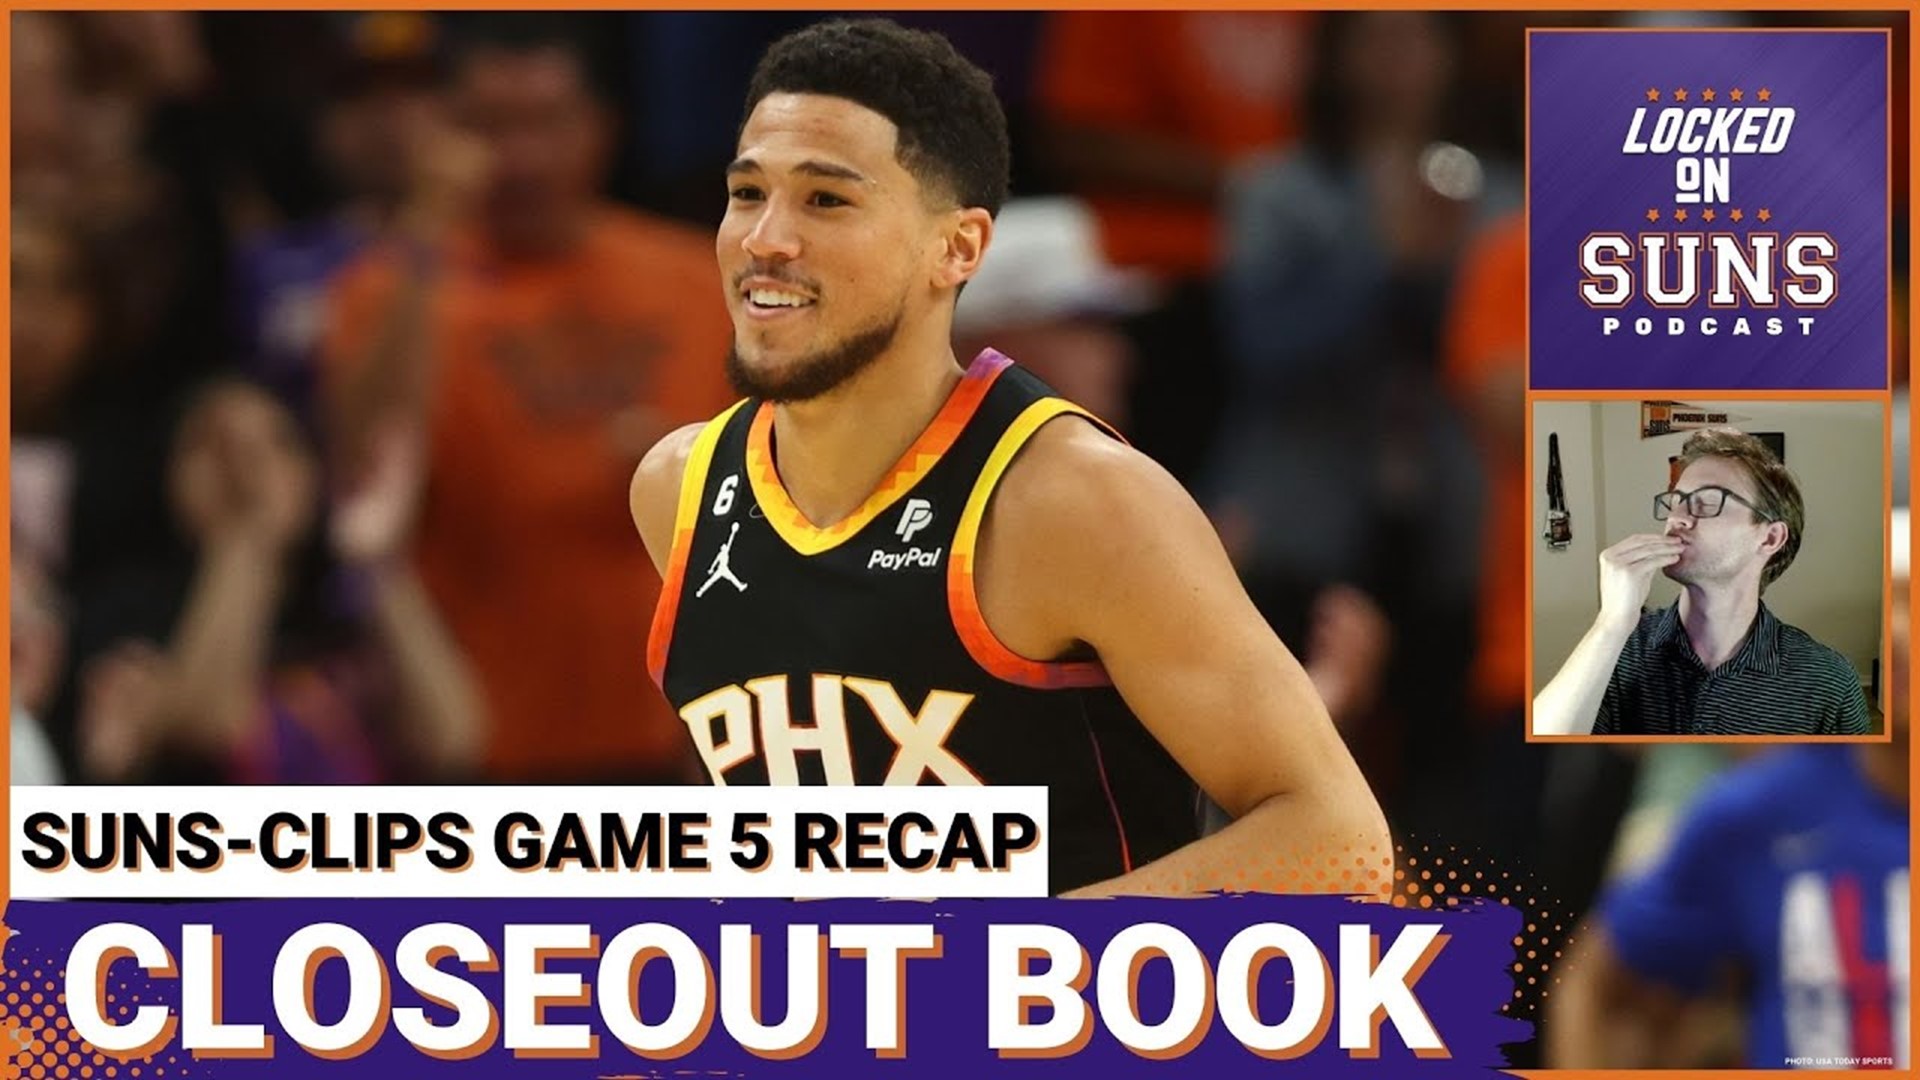 Devin Booker went off for 47 points for the Phoenix Suns at home to close out the Clippers and add another magical moment to his NBA playoffs resume.